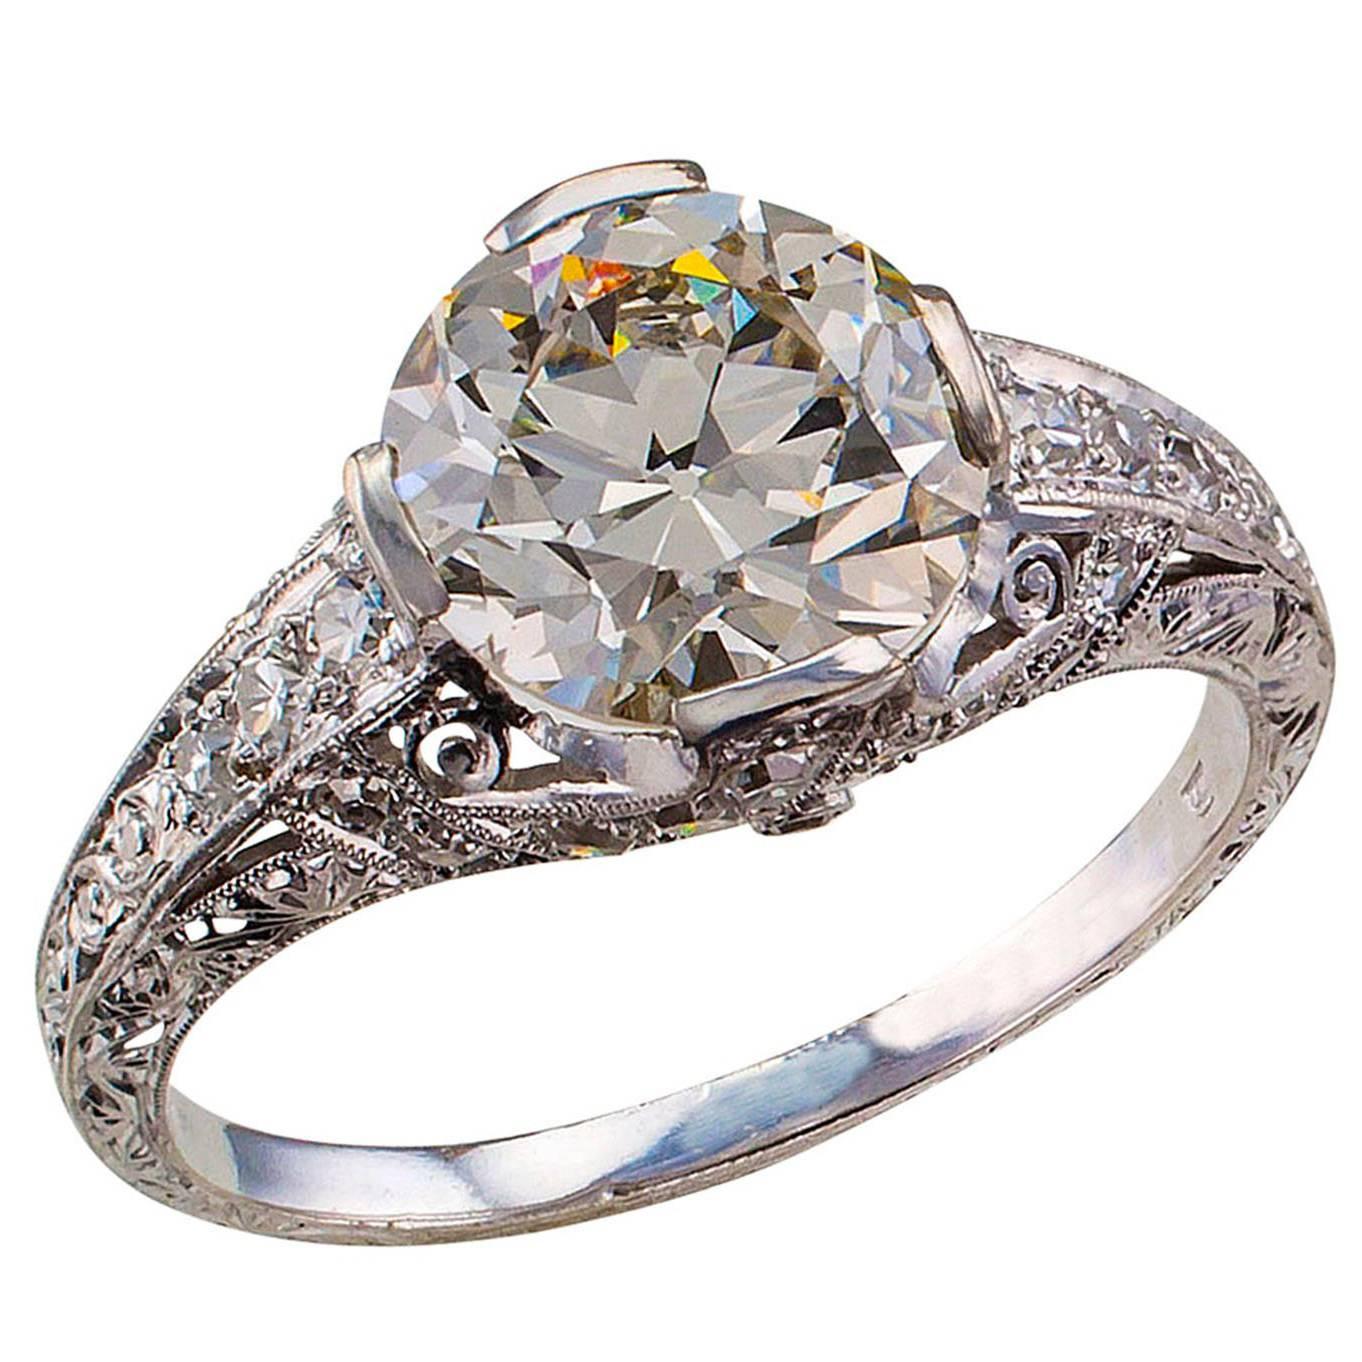 2.27 Carats GIA Diamond Solitaire Art Deco Engagement Ring